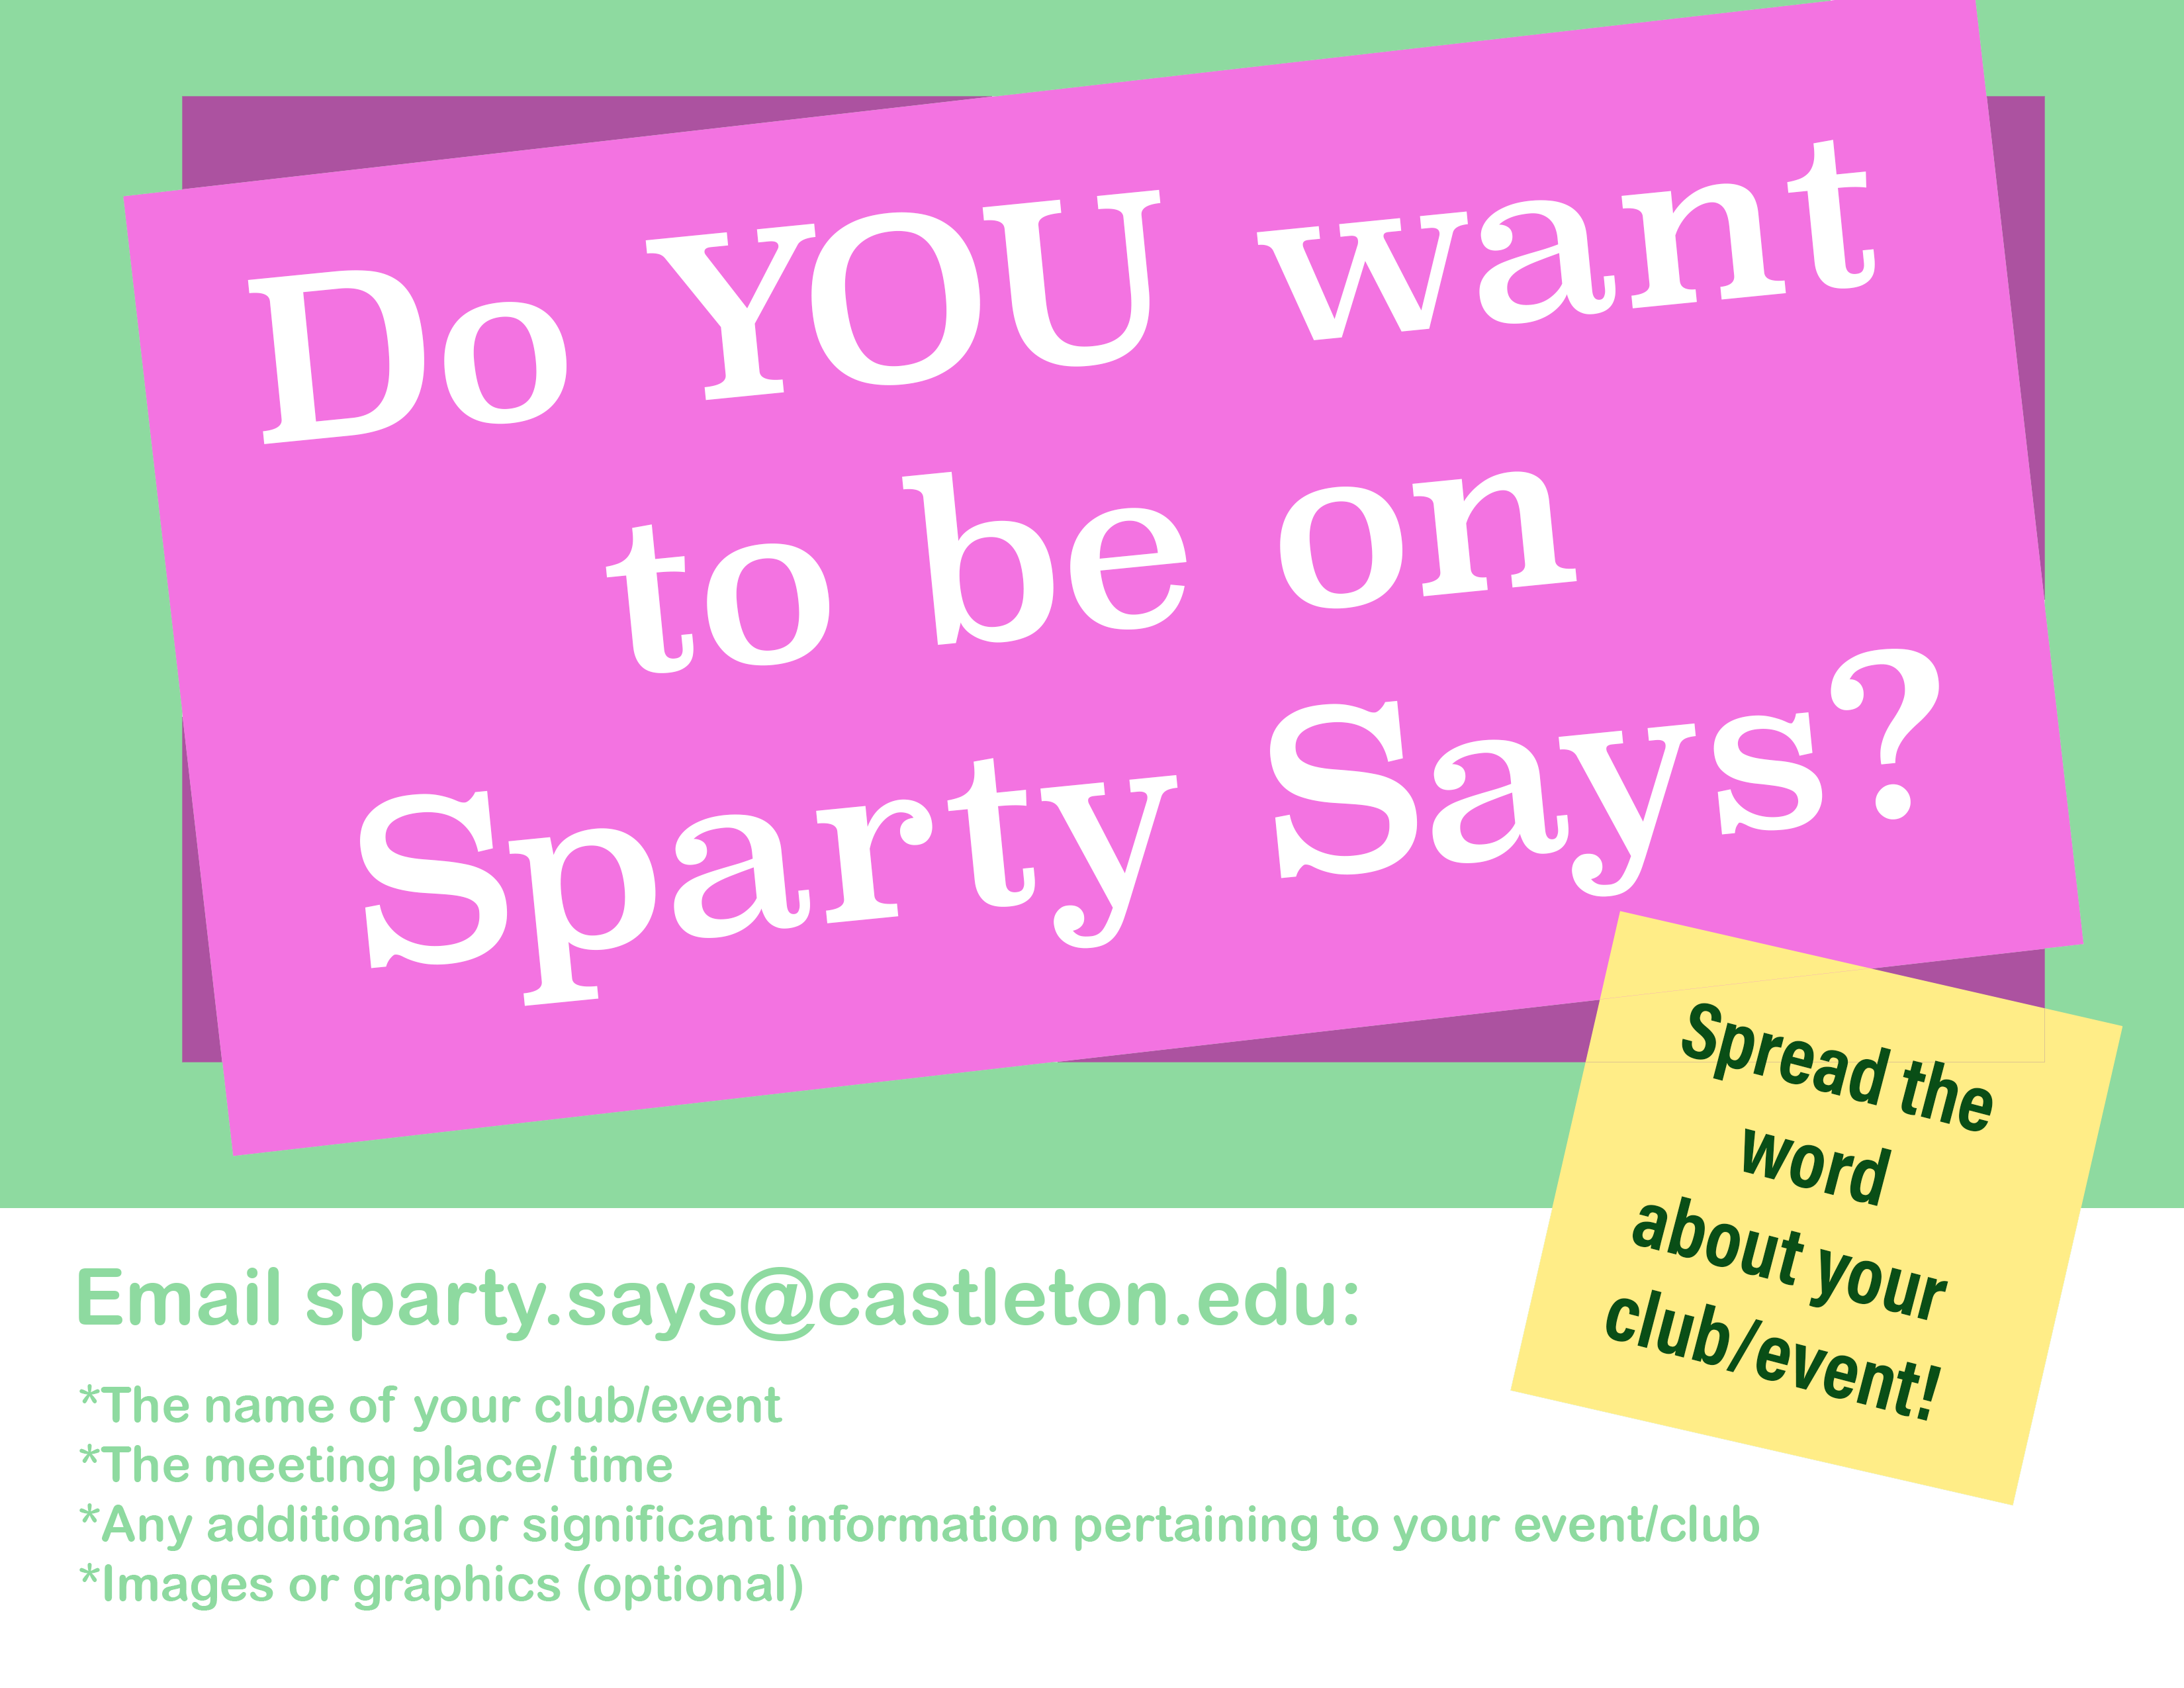 Do YOU Want to be on Sparty Says?